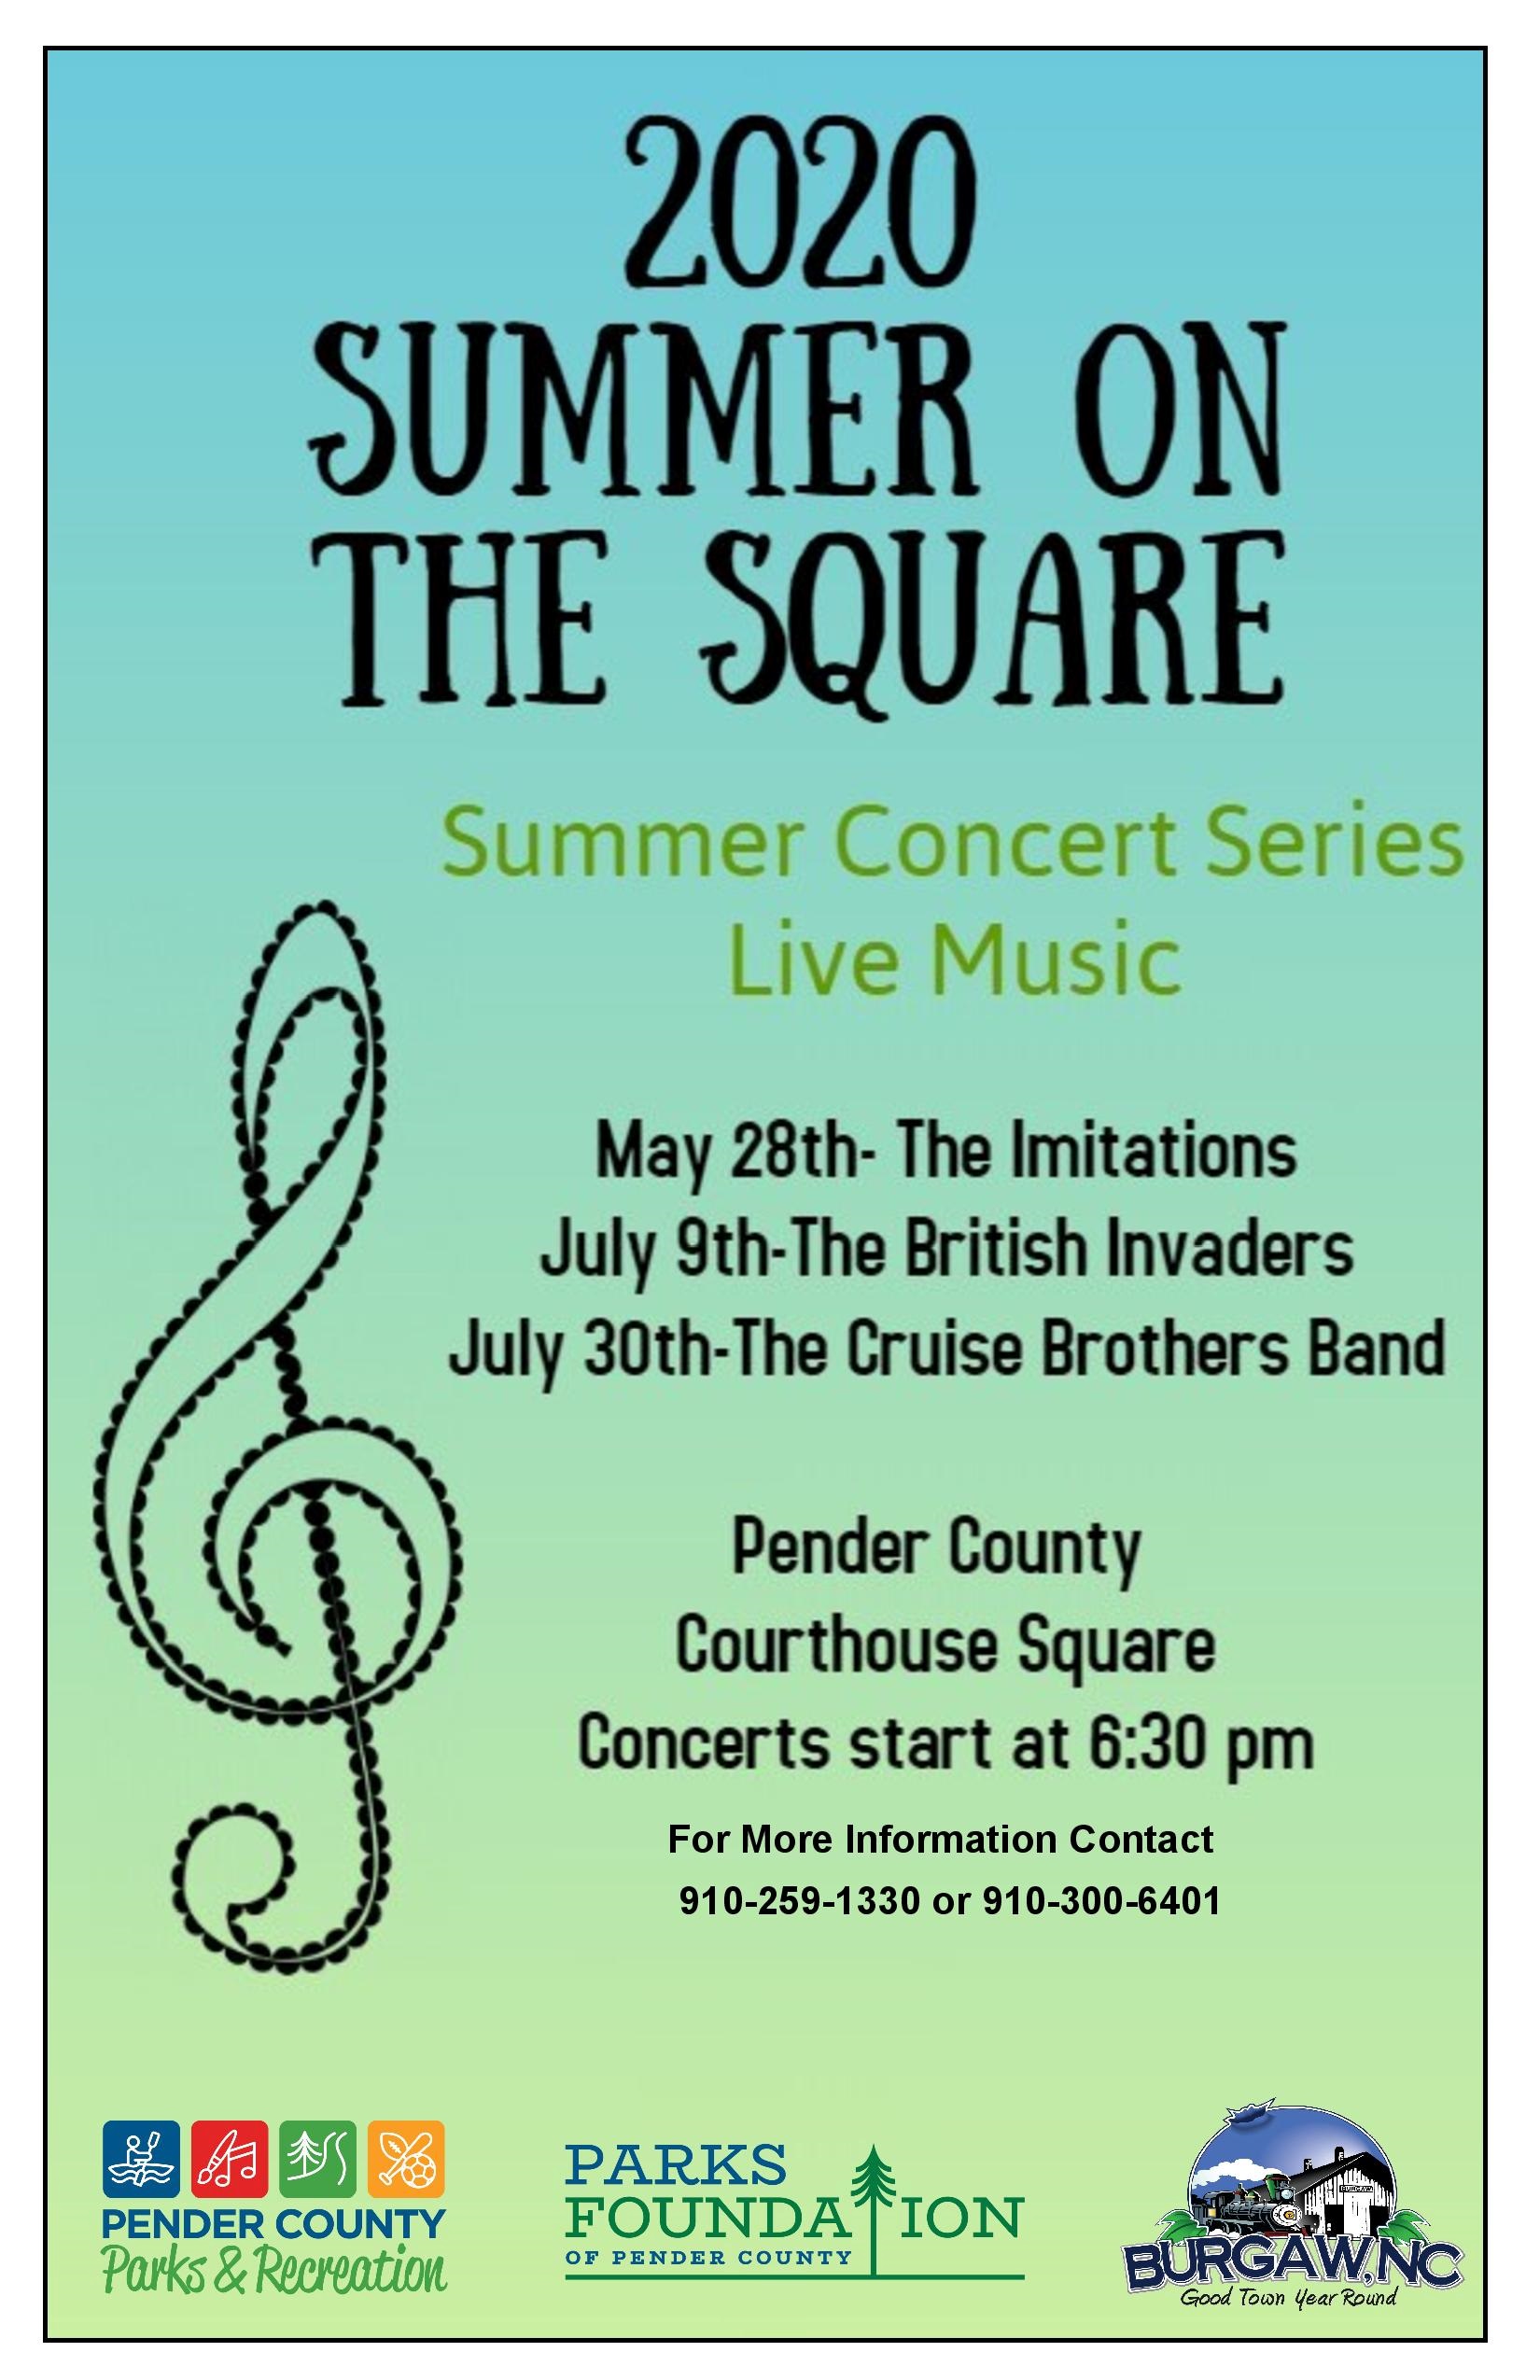 2020 Summer On The Square